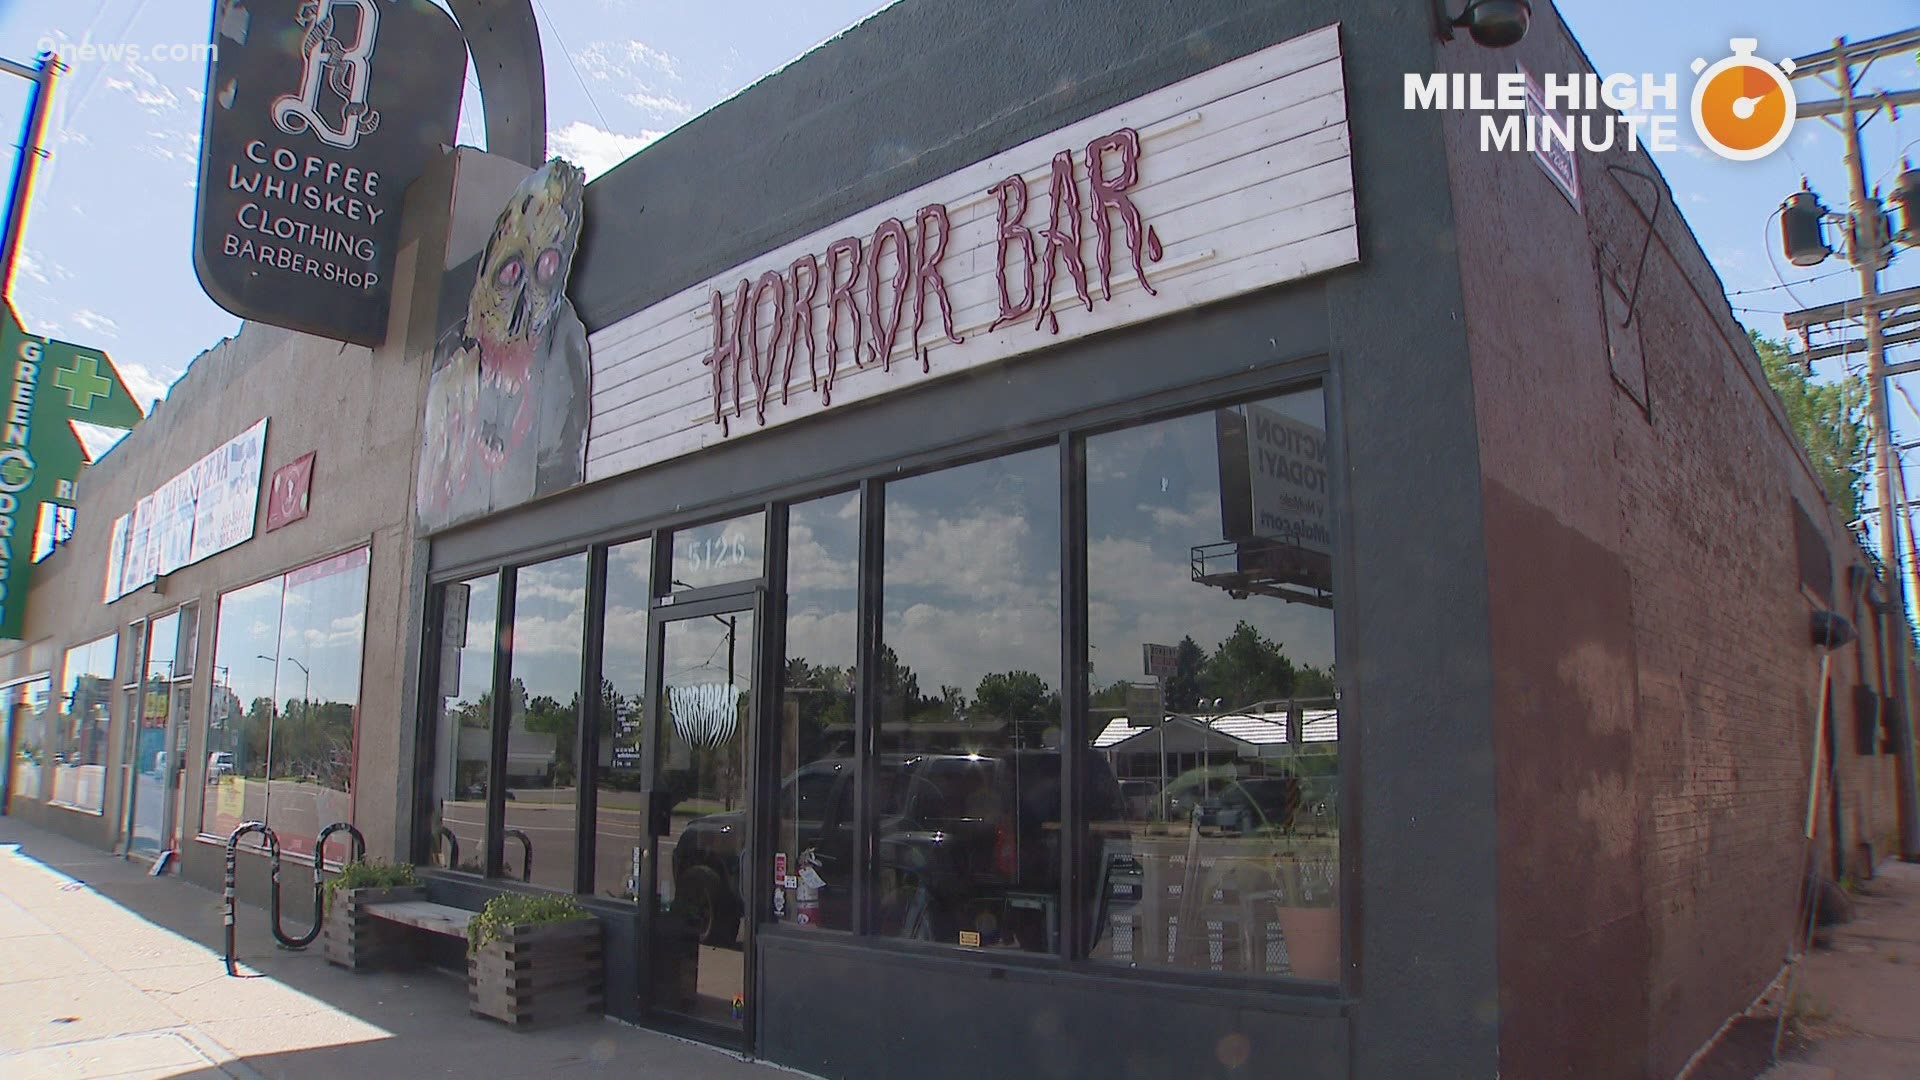 The owner describes Horror Bar as a sports bar with monster movies playing instead.